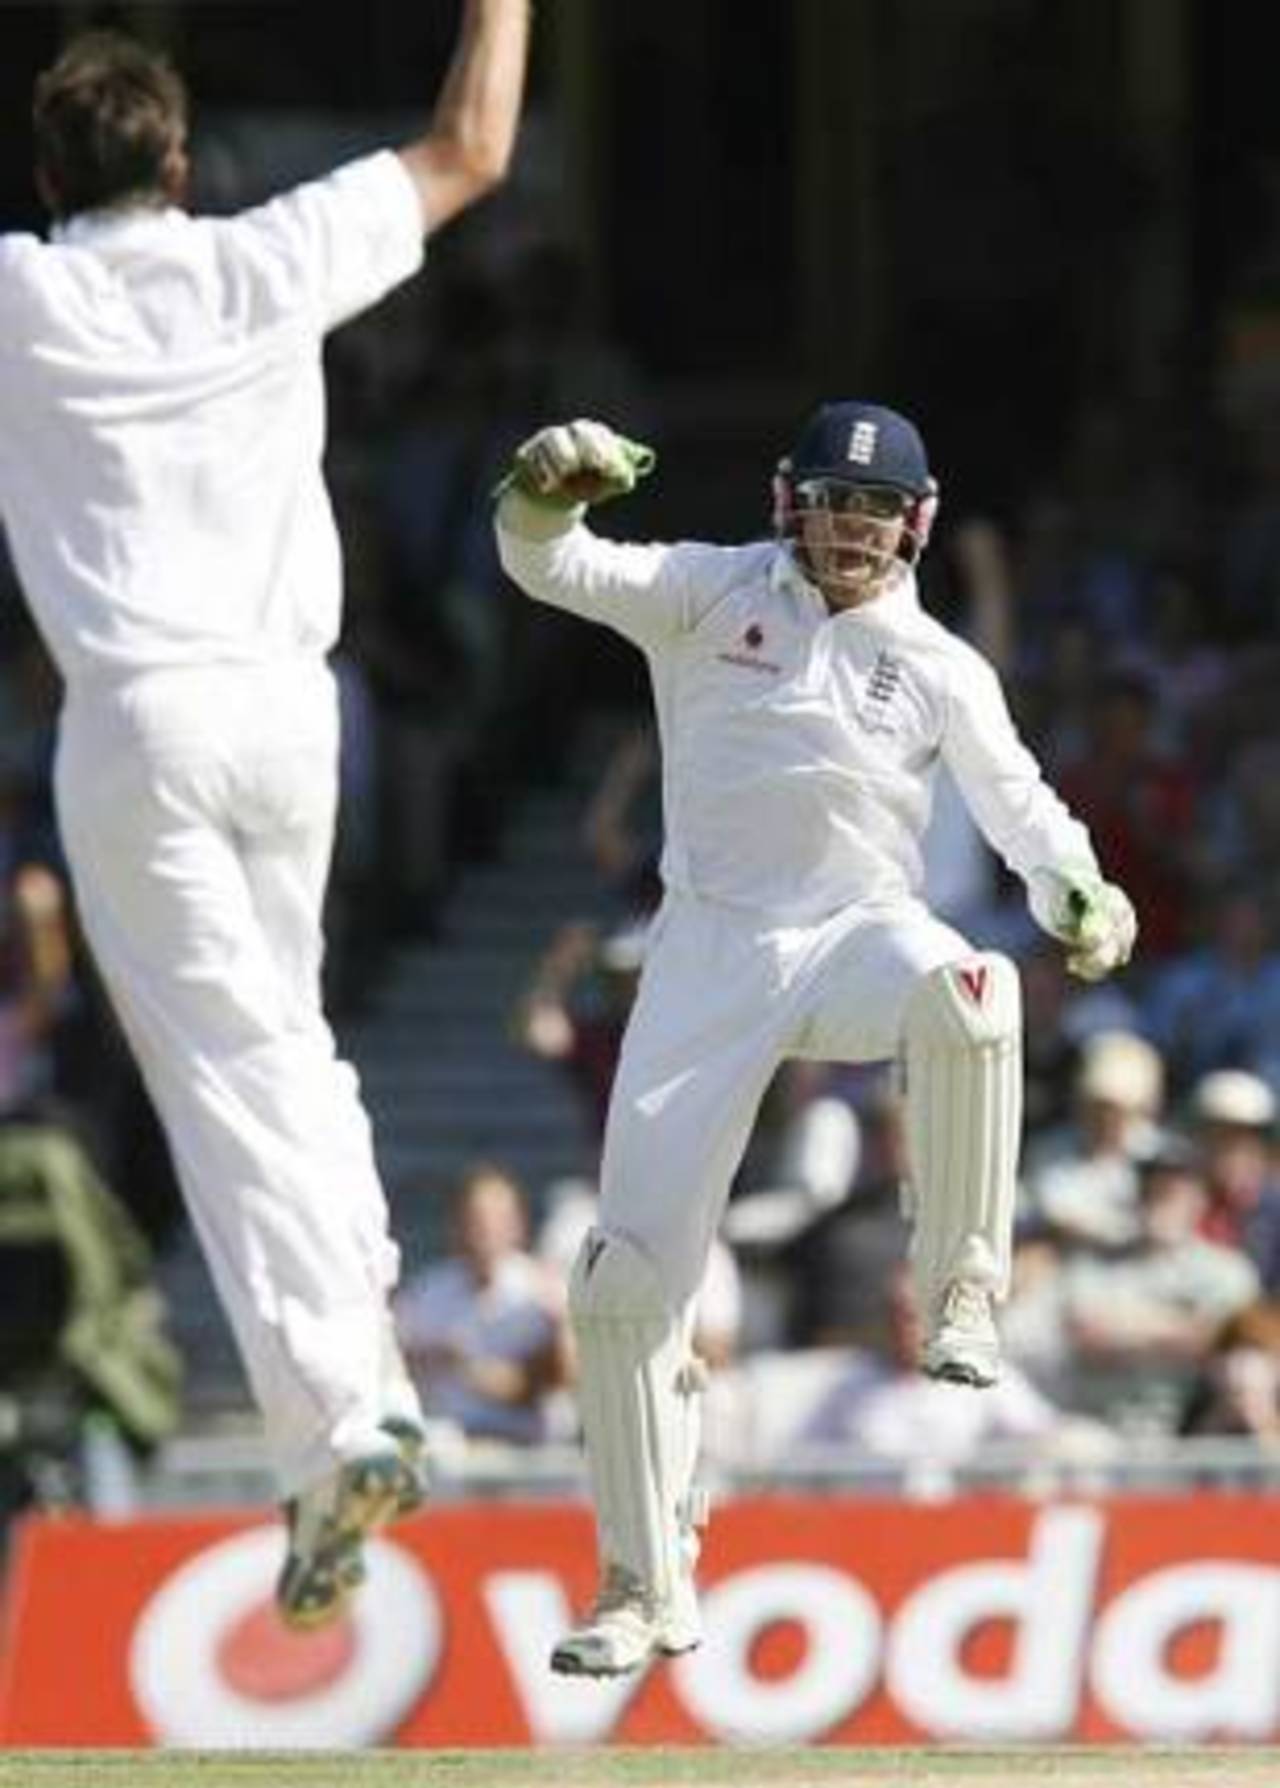 Matt Prior celebrates his superb glovework to remove Marcus North, England v Australia, 5th Test, The Oval, 4th day, August 23, 2009